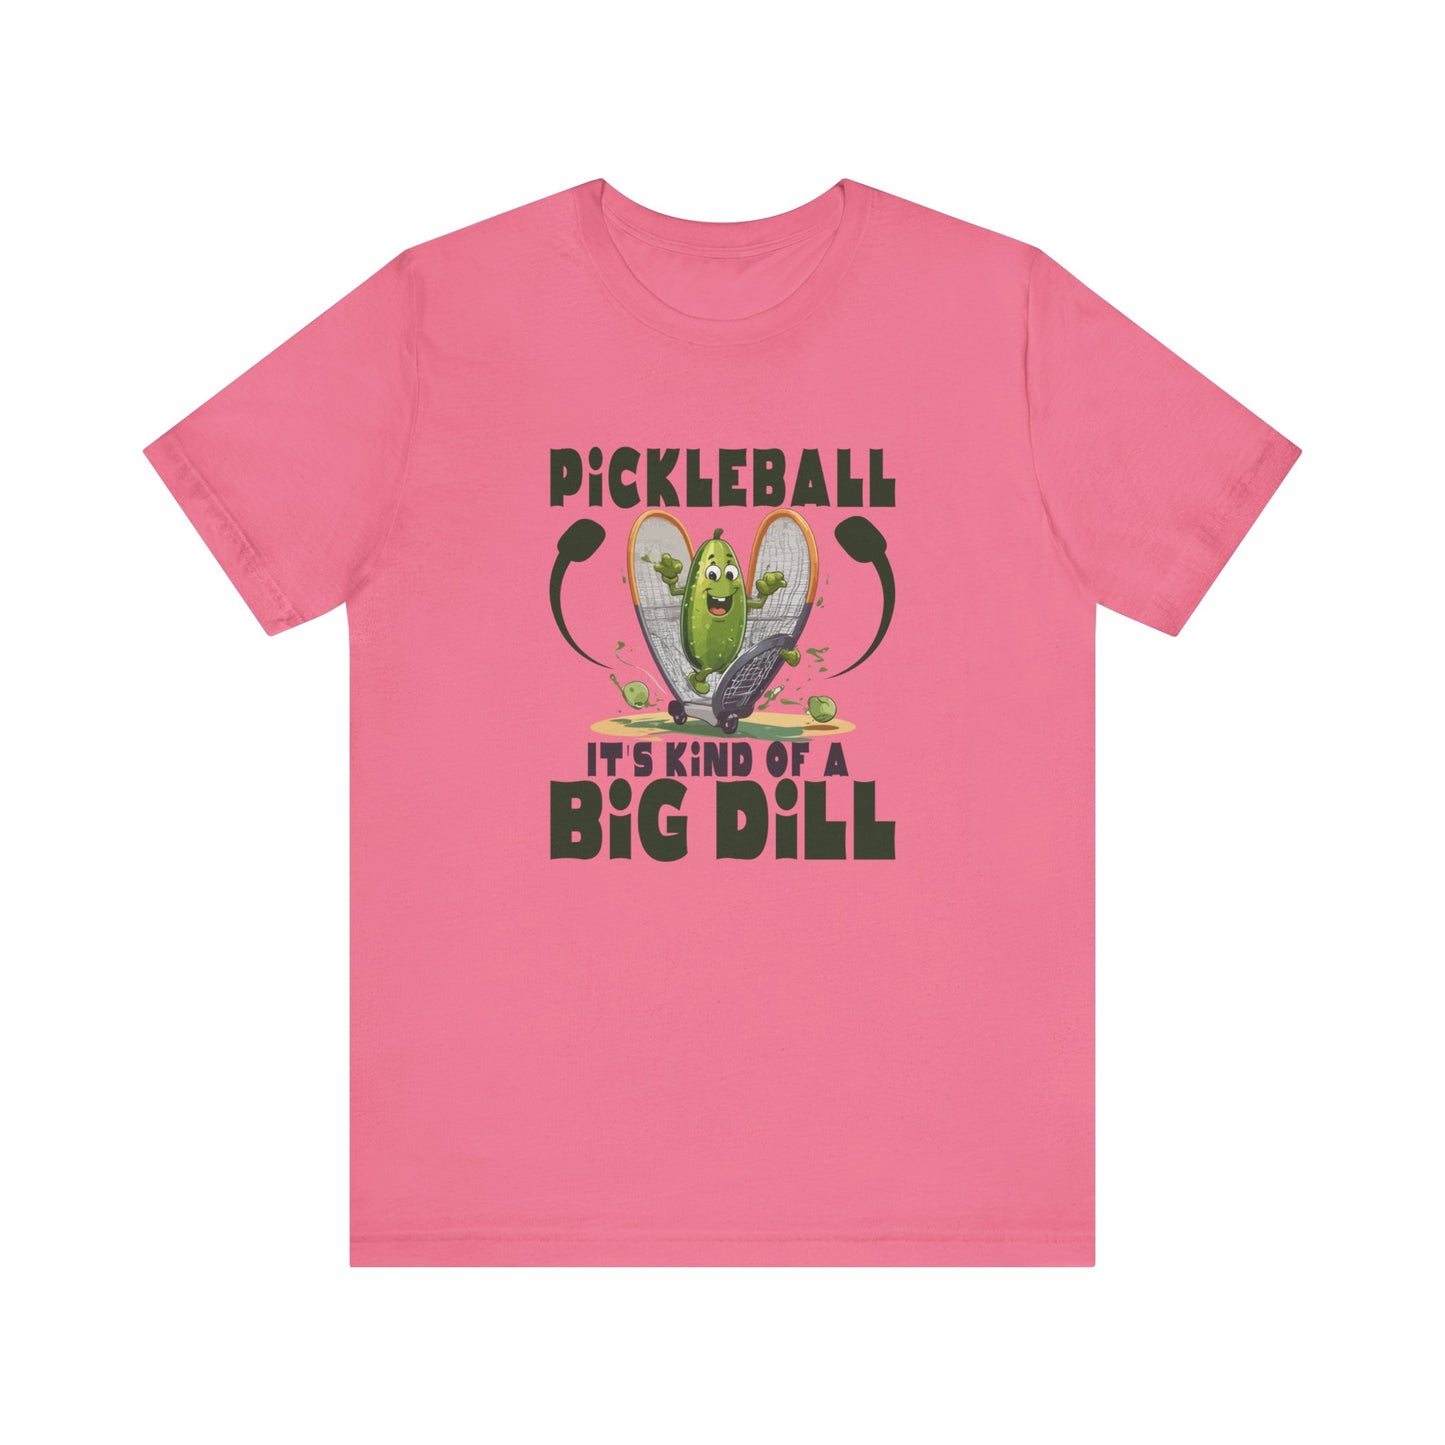 Pickle Ball, It's Kind of a Big Dill - Unisex Jersey Short Sleeve Tee